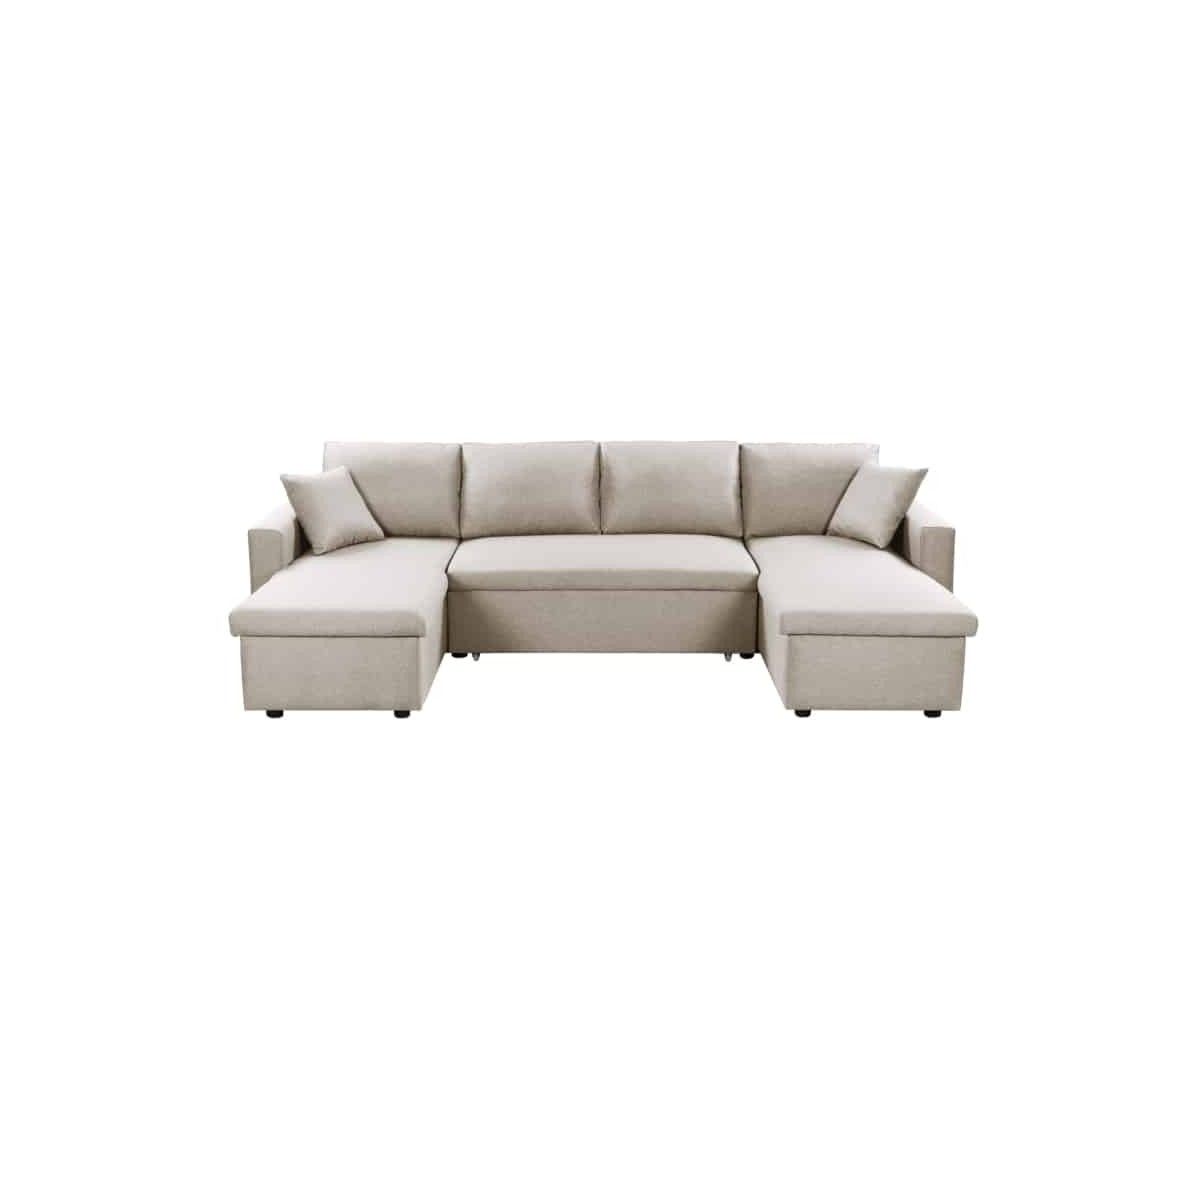 Convertible Corner Sofa 6 Places Raphy Fabric (beige) For Beige L Shaped Sectional Sofas (View 5 of 15)